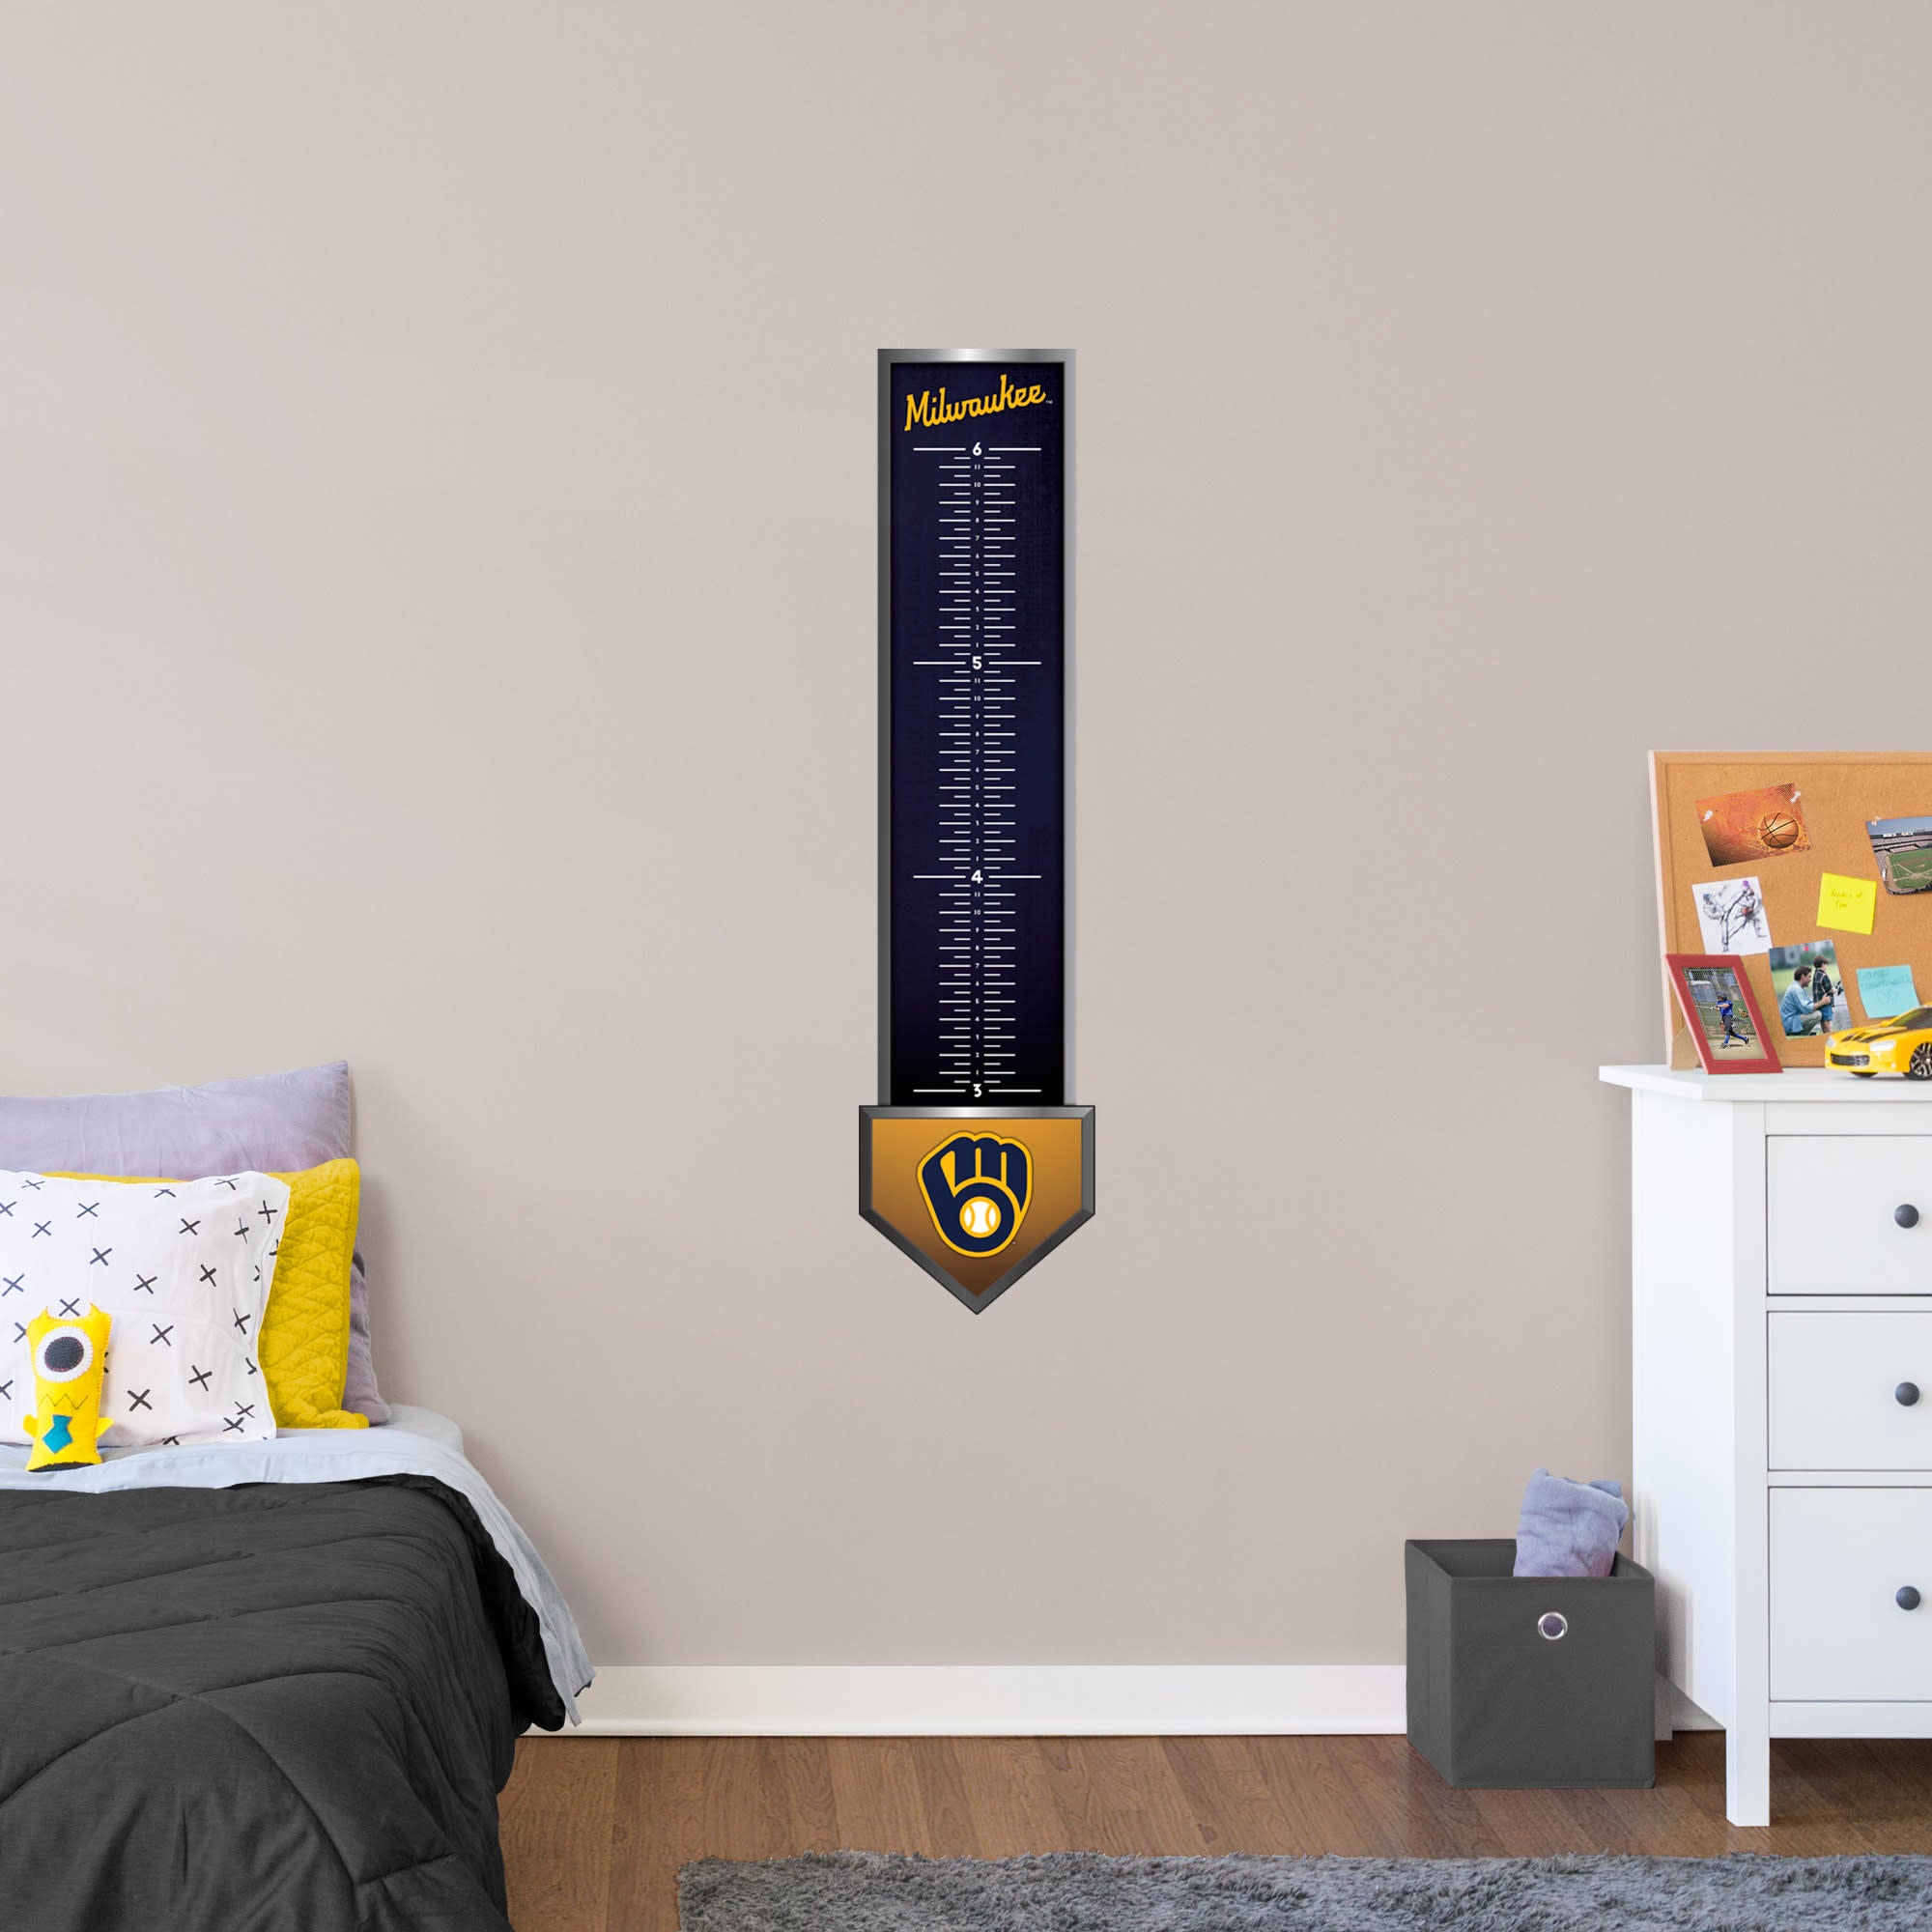 Milwaukee Brewers: Growth Chart - Officially Licensed MLB Removable Wall Graphic 13.0"W x 54.0"H by Fathead | Vinyl